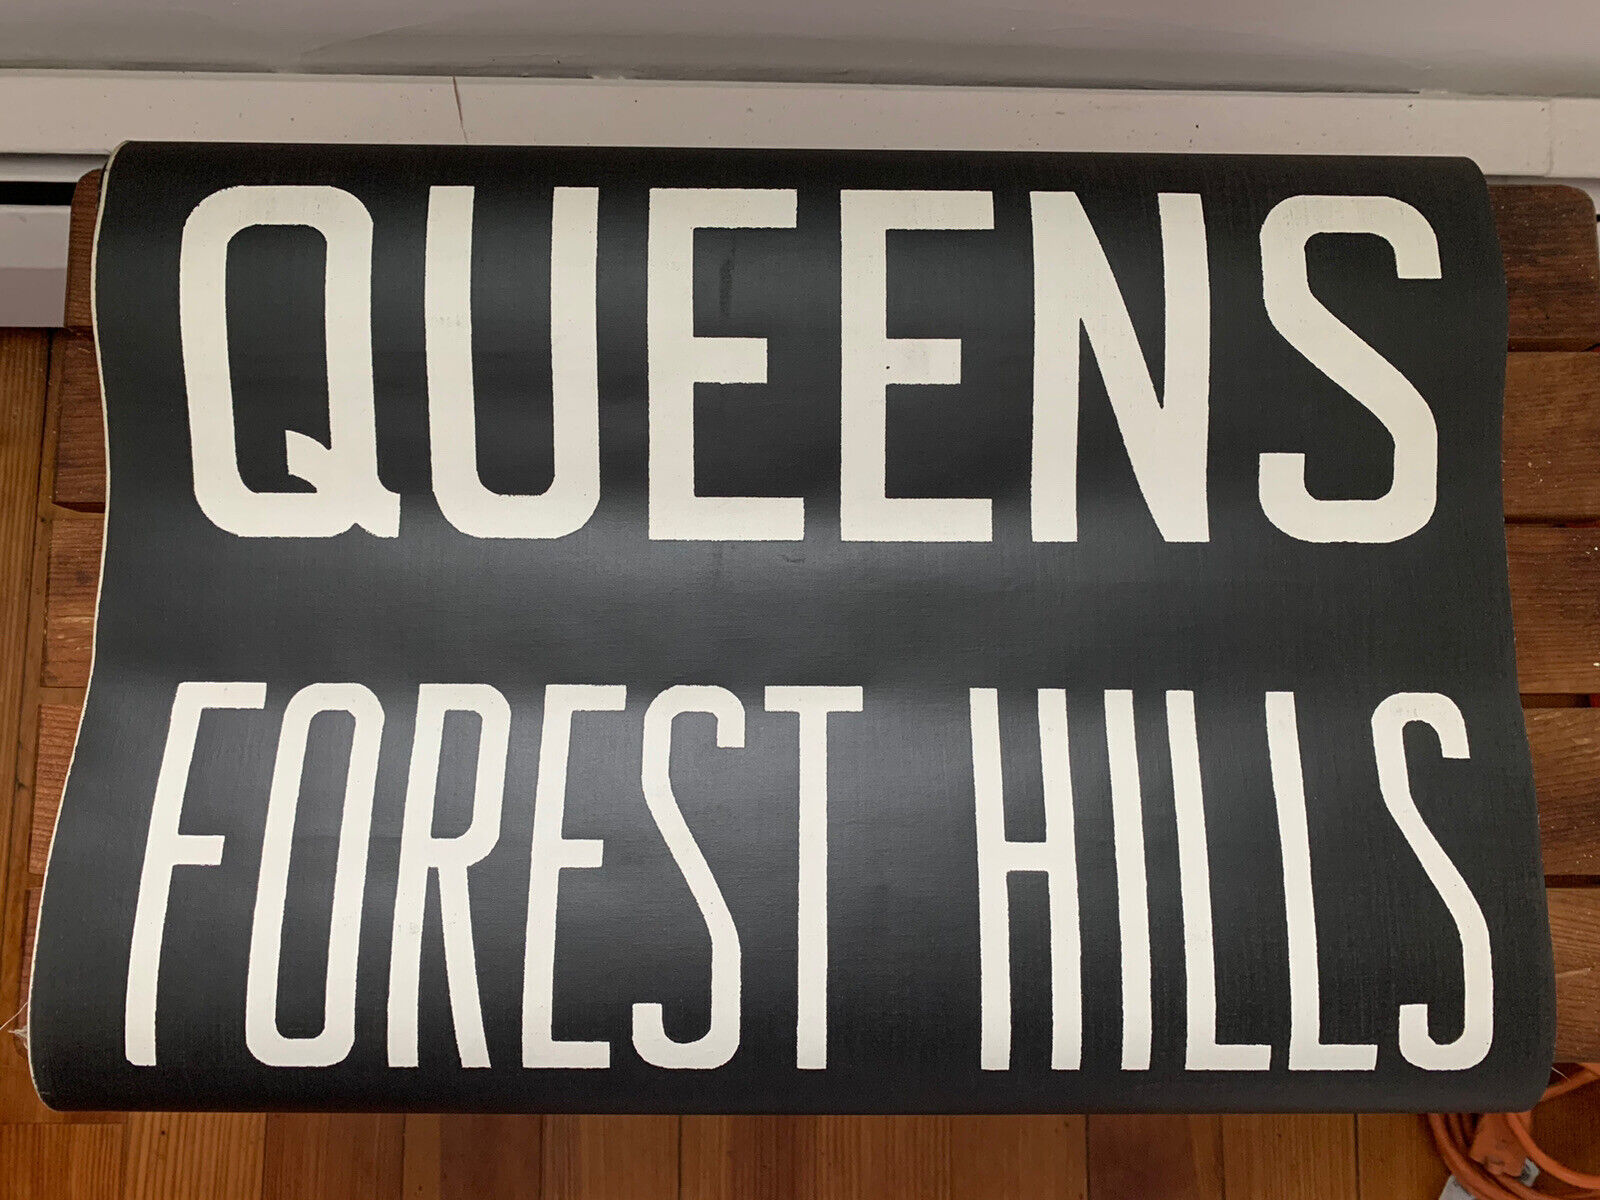 NY NYC SUBWAY ROLL SIGN QUEENS BOULEVARD FOREST HILLS 71st CONTINENTAL AVE IND